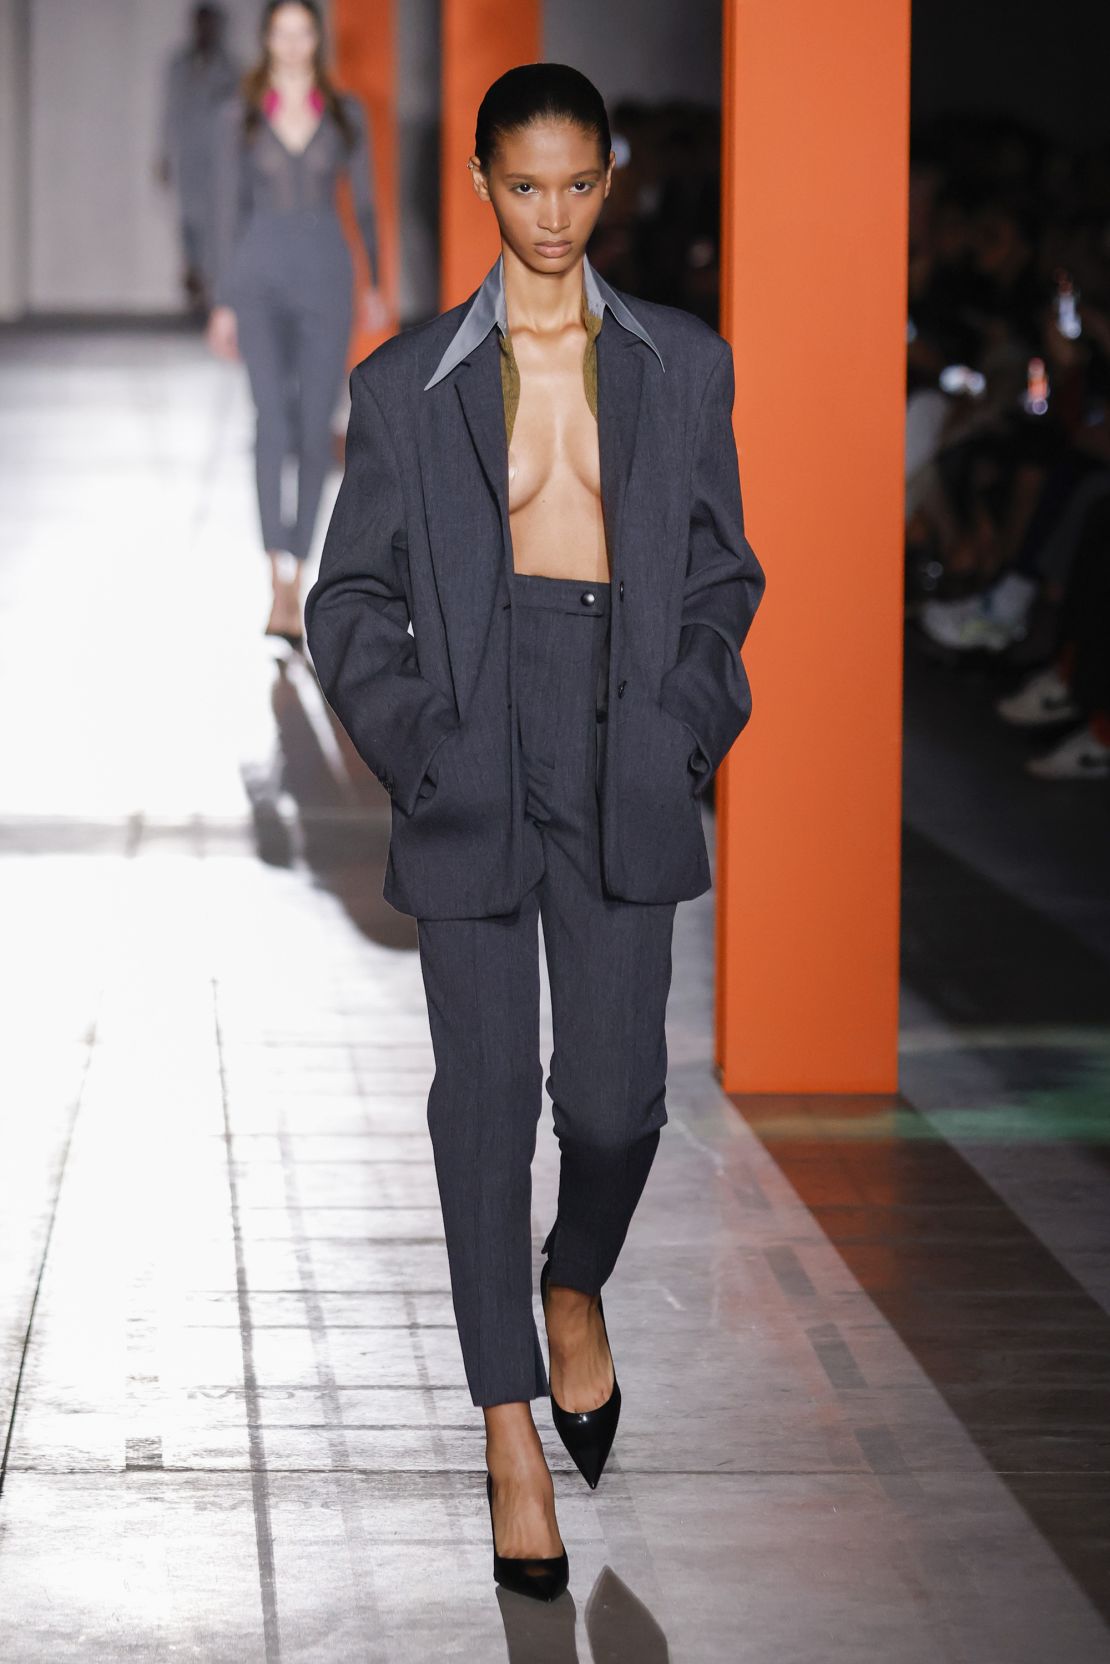 Muted tones and an emphasis on new "quotidian" clothes were on the menu at Prada.